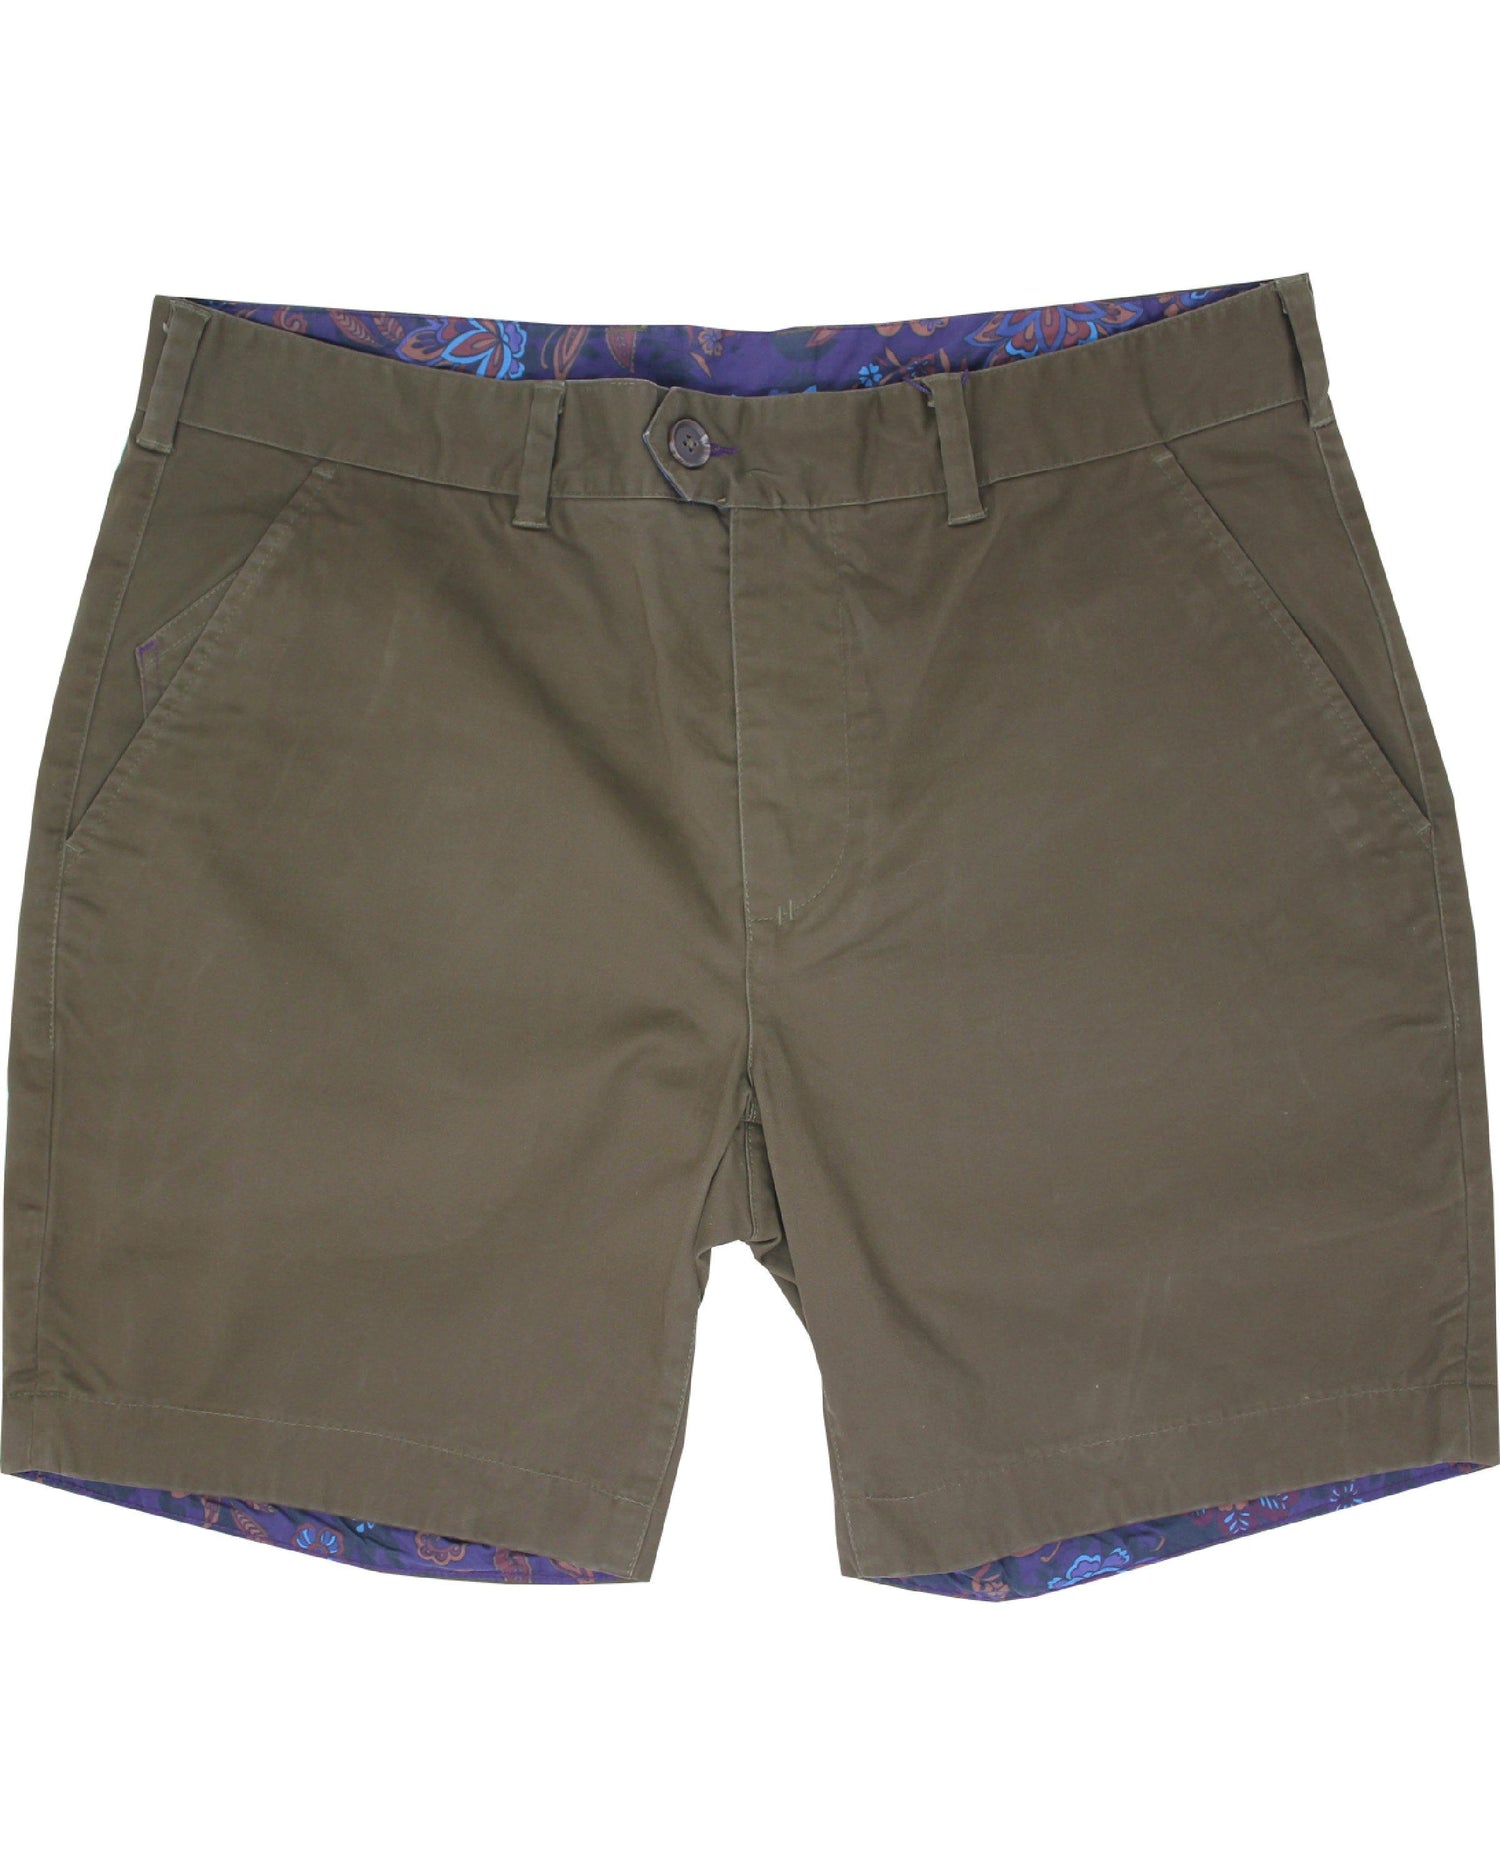 John Lux Olive Shorts – Lords Of Harlech